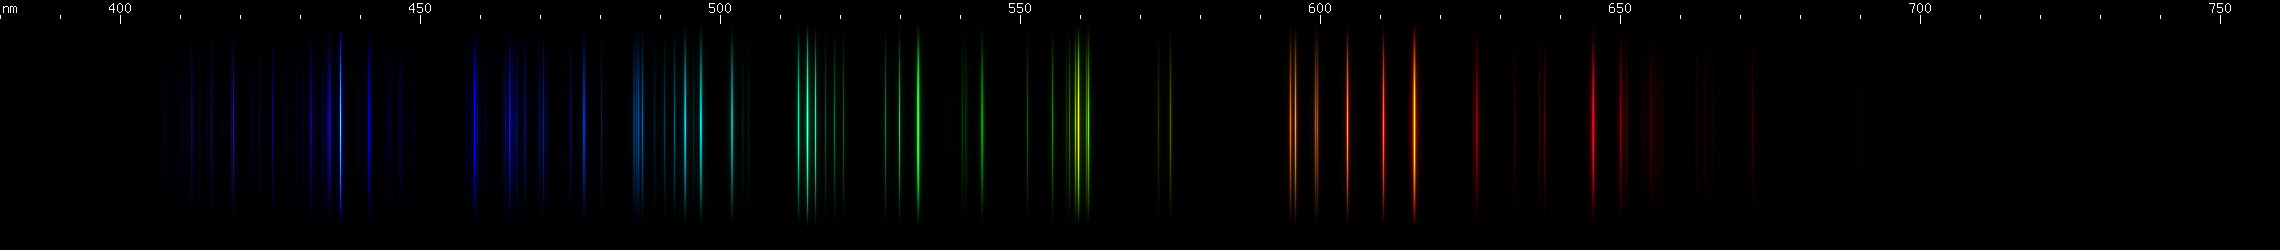 Spectral lines of Oxygen.